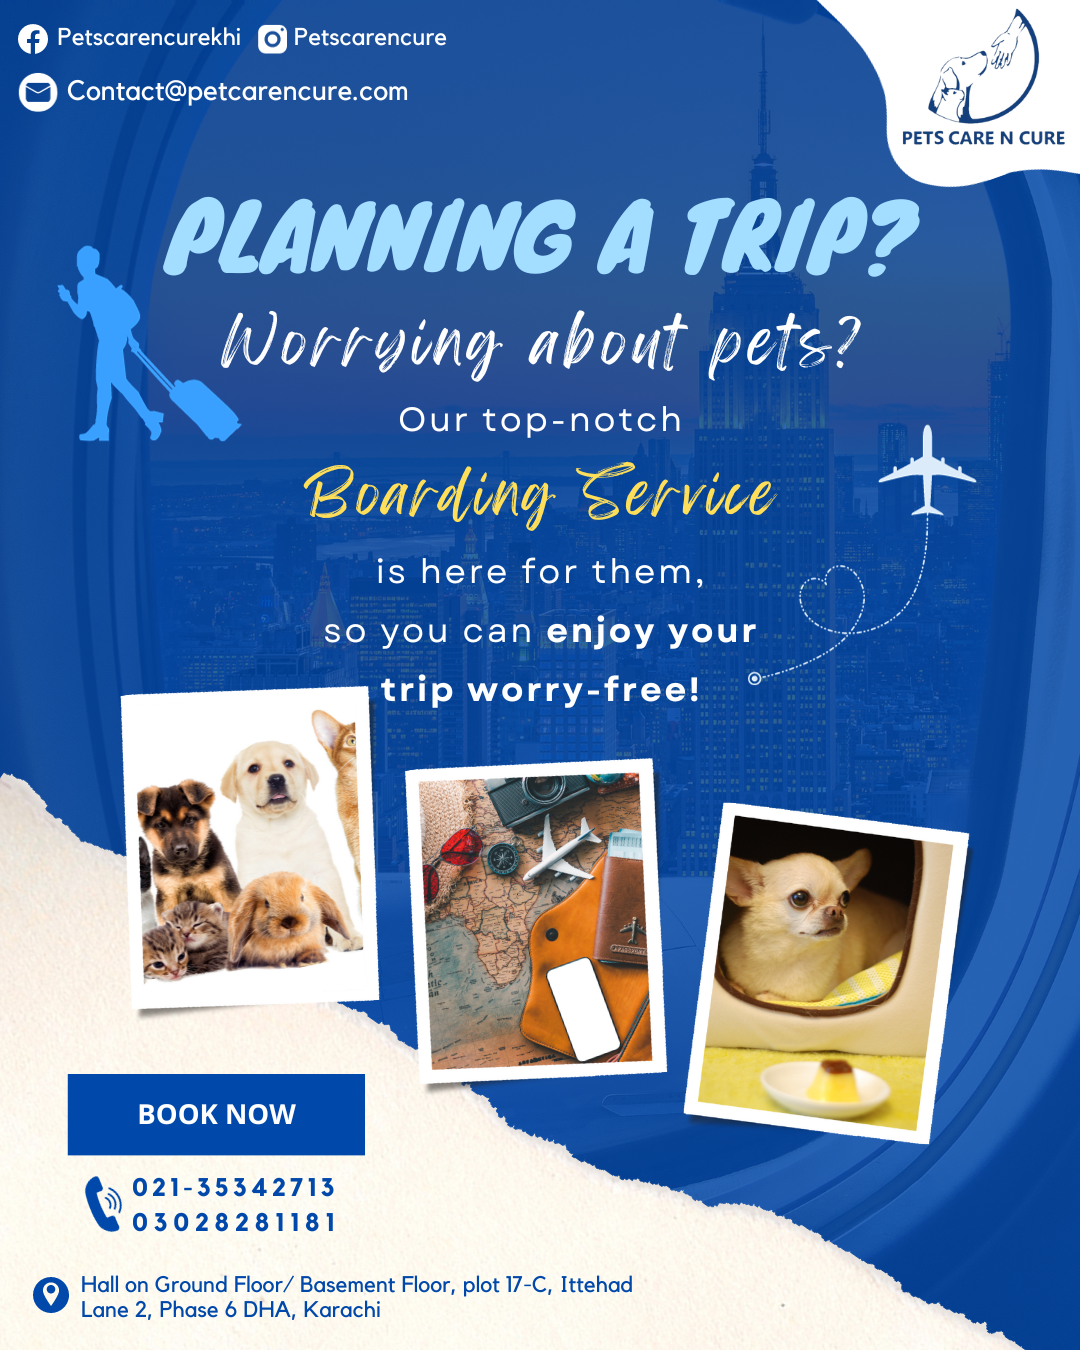 Secure, comfortable pet boarding services in Karachi. Trust us for a stress-free stay for your beloved pets. Professional care, a home away from home.